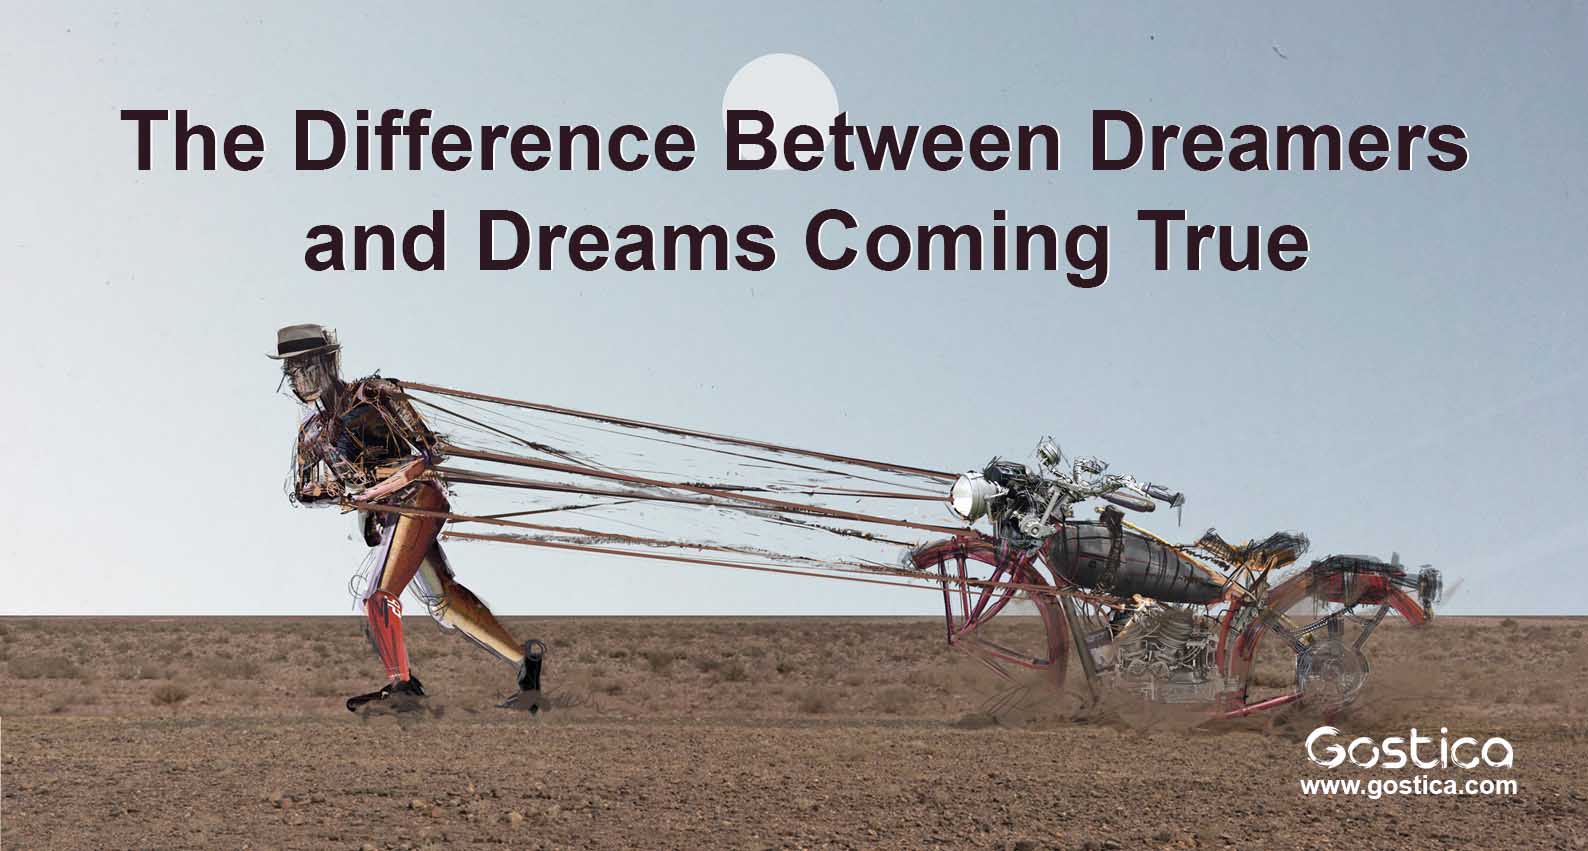 The-Difference-Between-Dreamers-and-Dreams-Coming-True.jpg